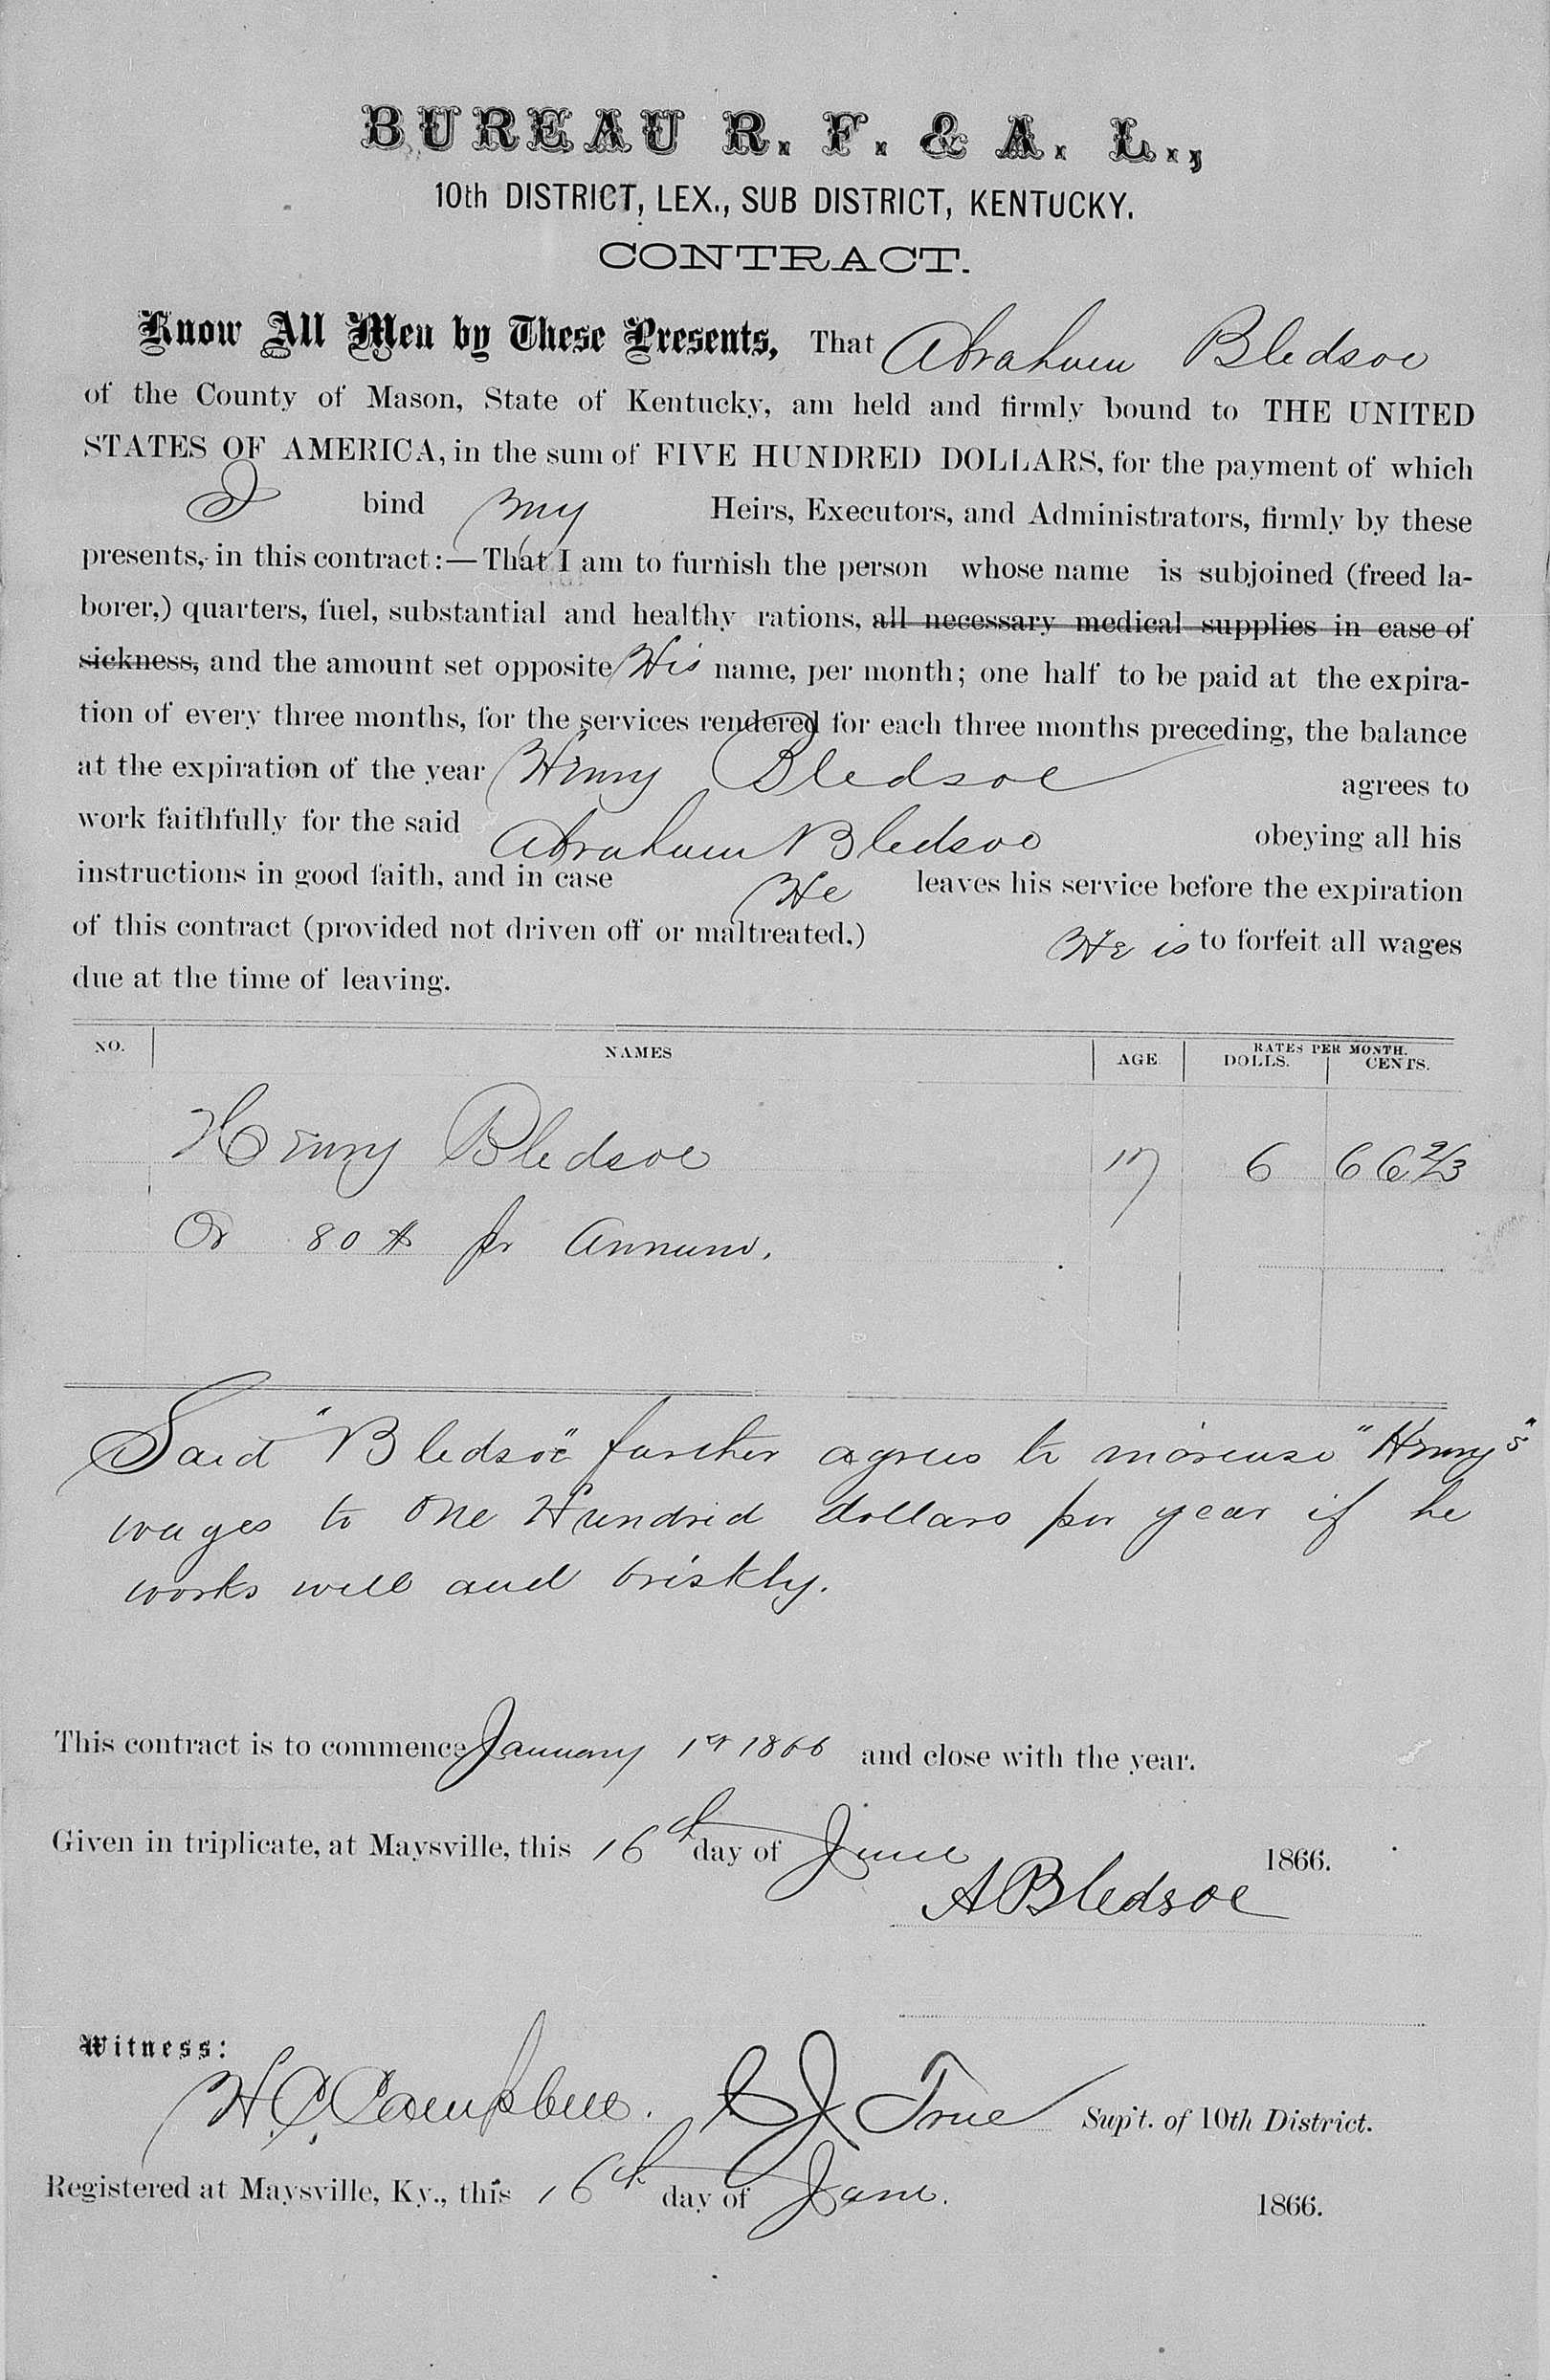 A labor contract for Henry Bledsoe. The contract starts January 1st 1866. It is signed with a witness.